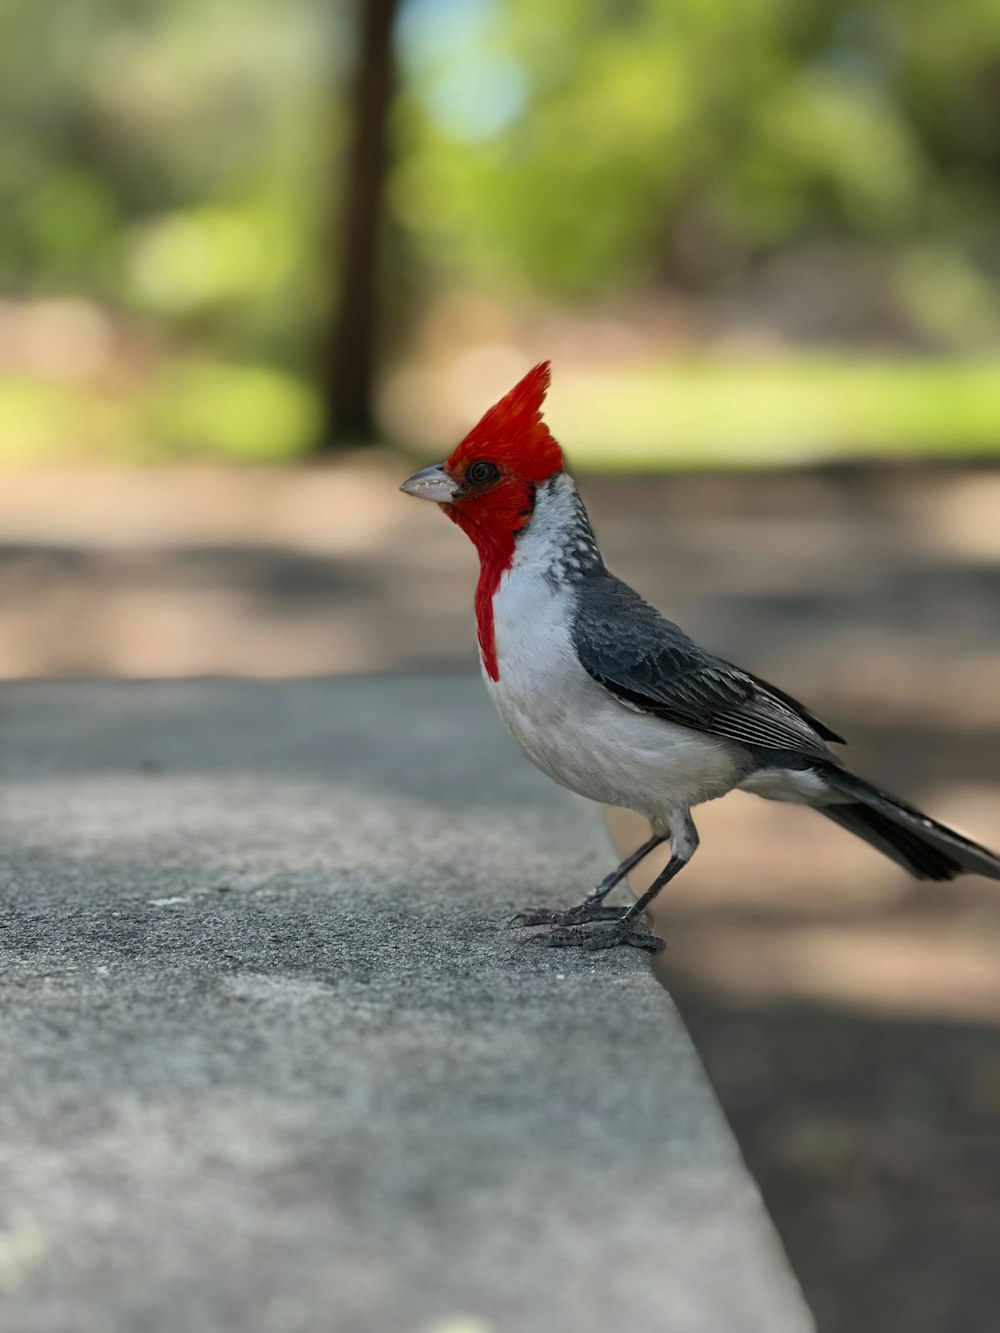 a bird with a red head is standing on a ledge